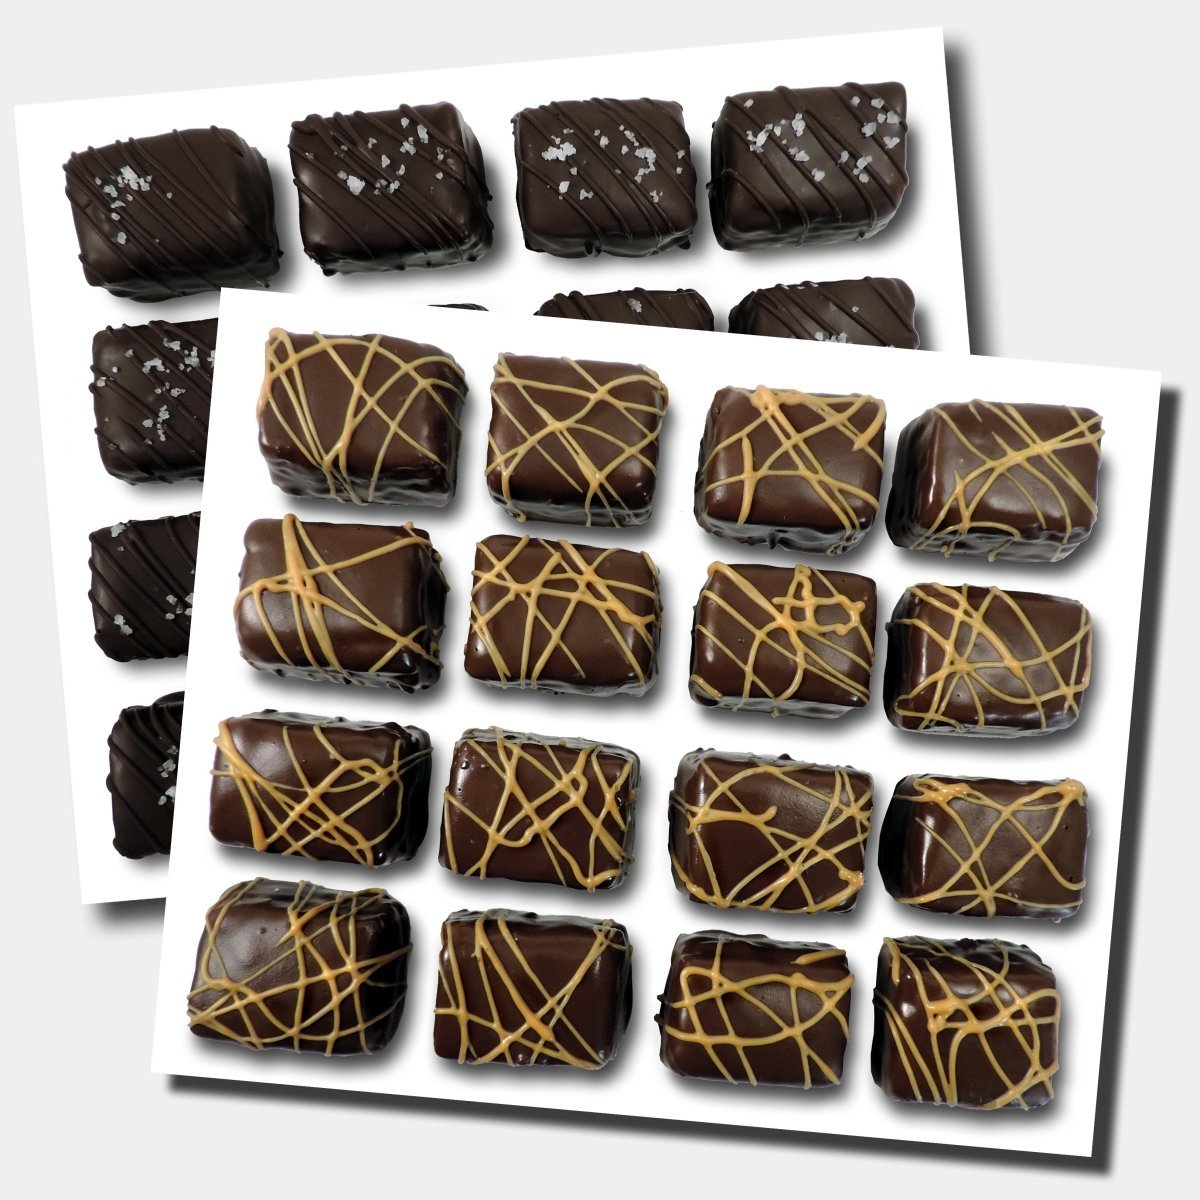 Pick Two Boxes! - Nettie's Craft Brownies